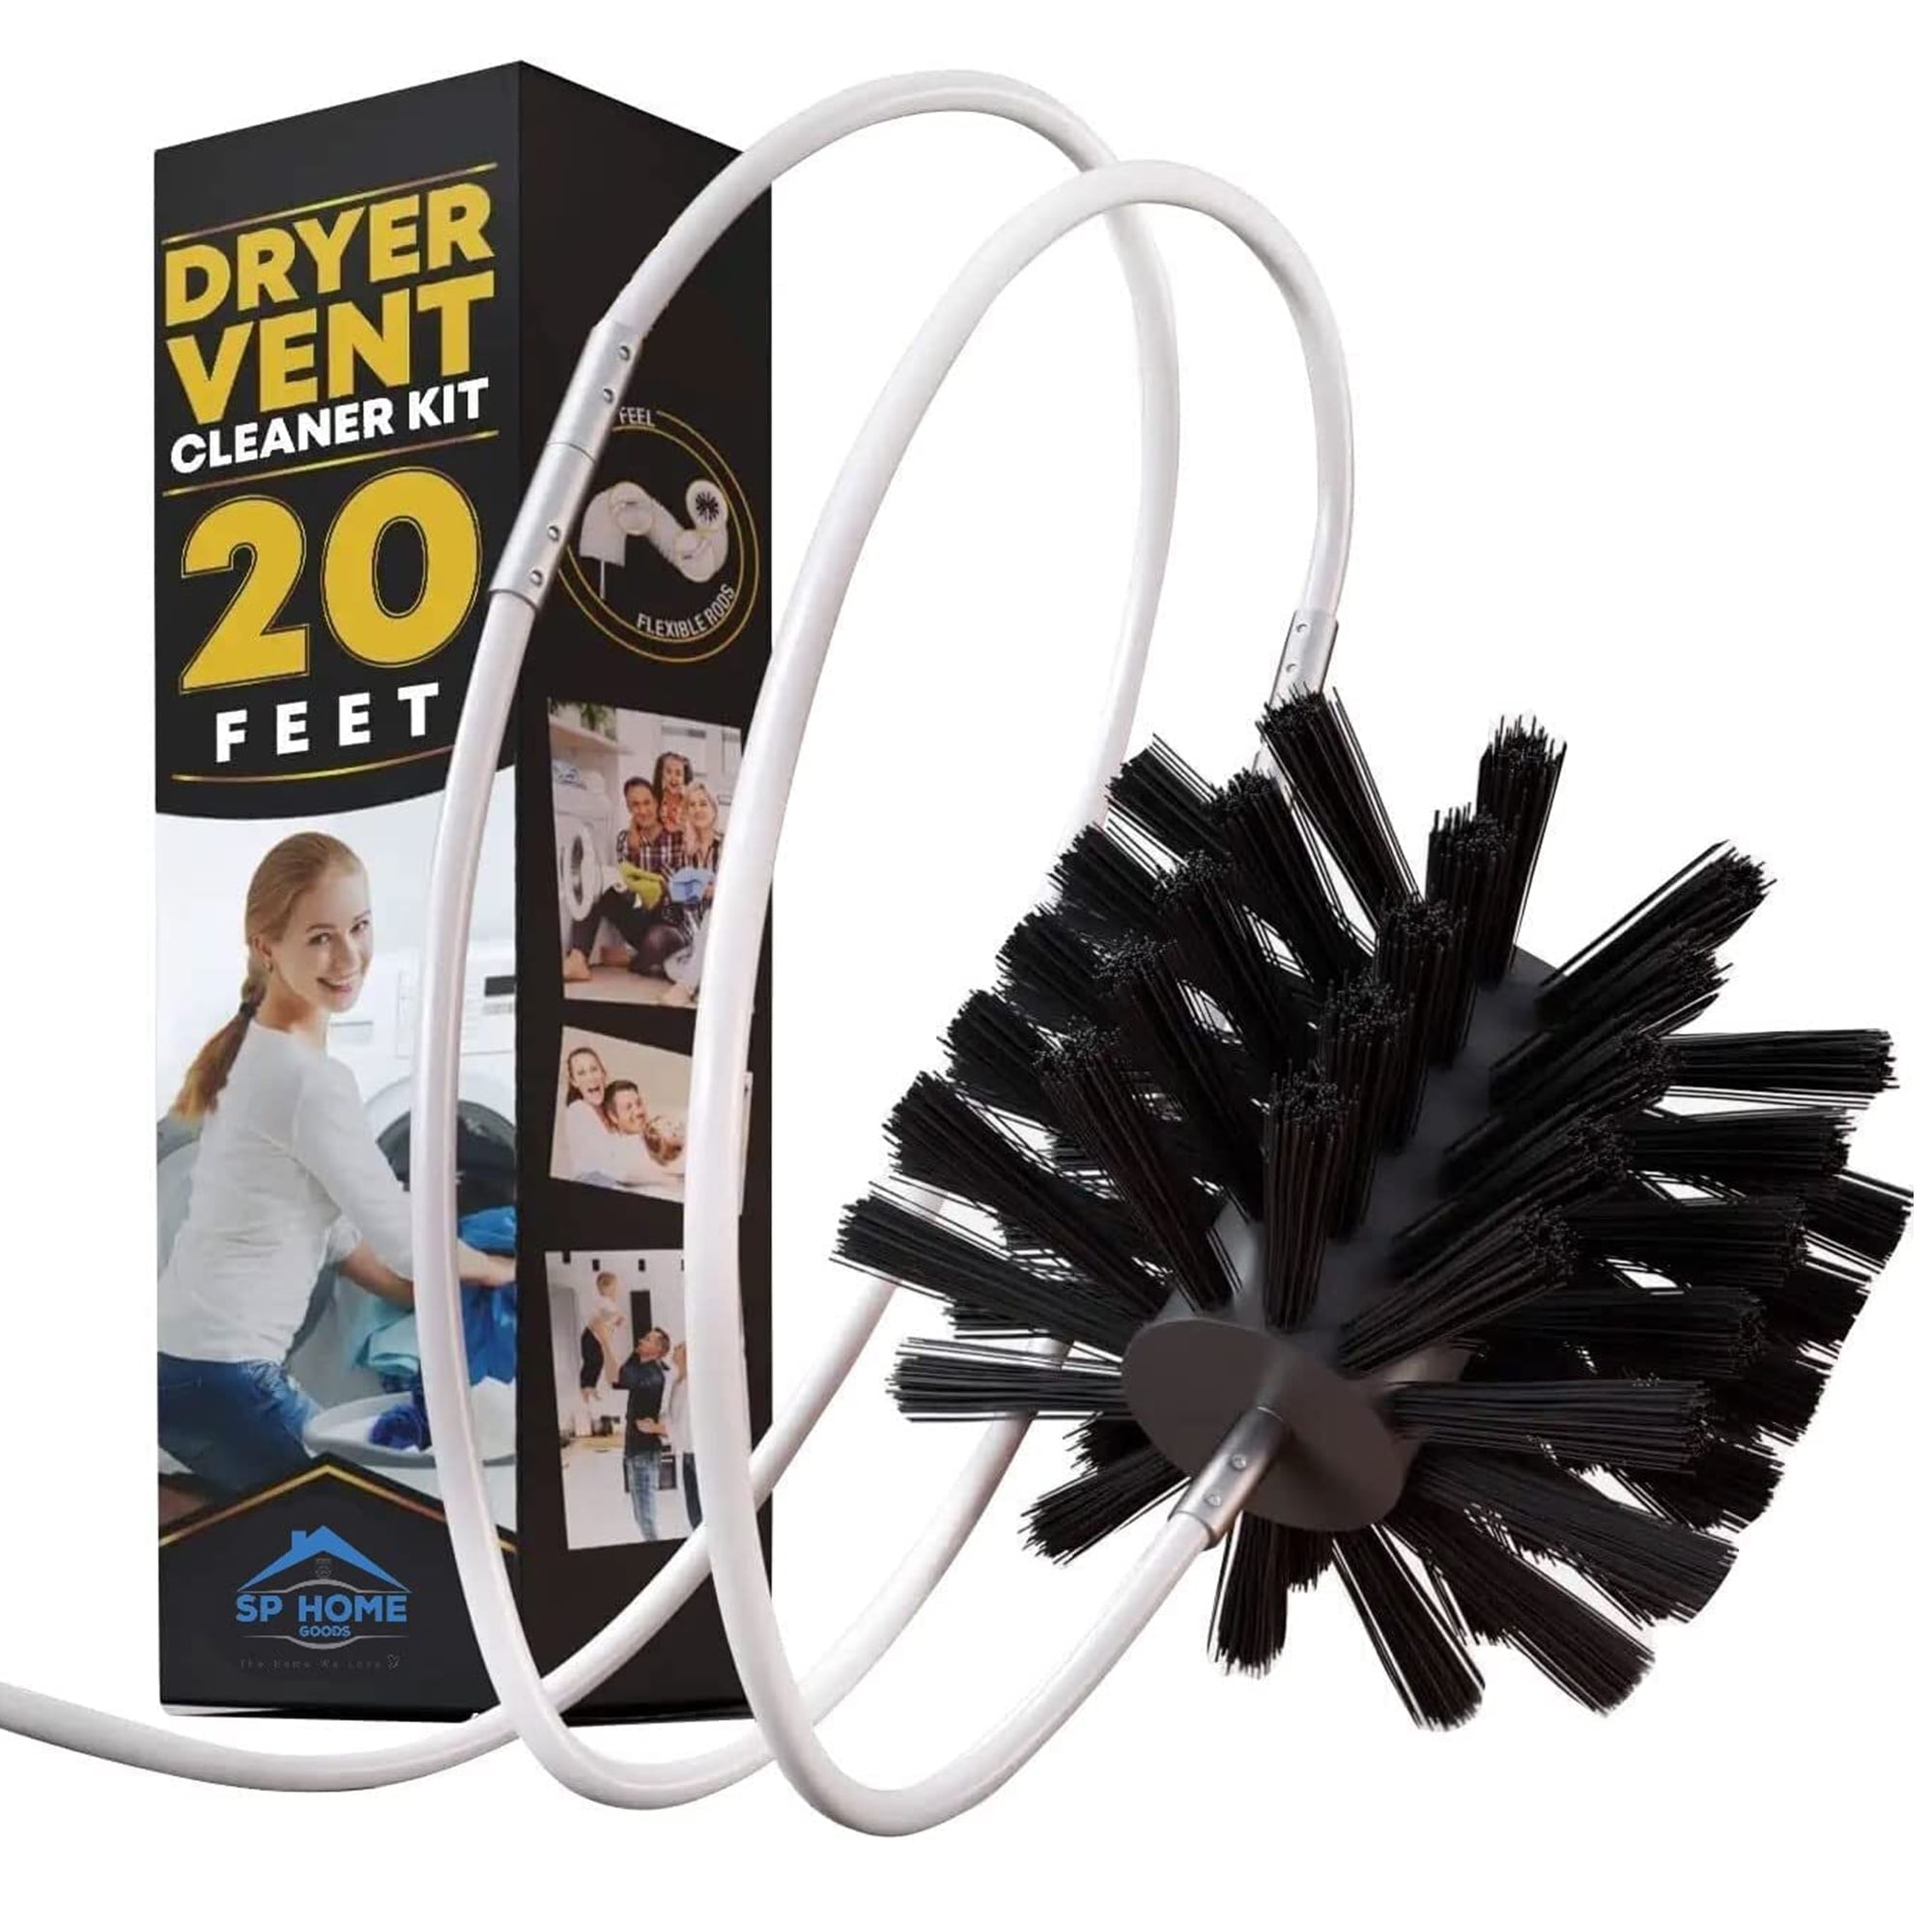 Dryvenck 20 Feet Dryer Vent Cleaner Kit,Lint Brush with Drill Attachment,Dryer  Cleaner Brush for Easy Cleaning 